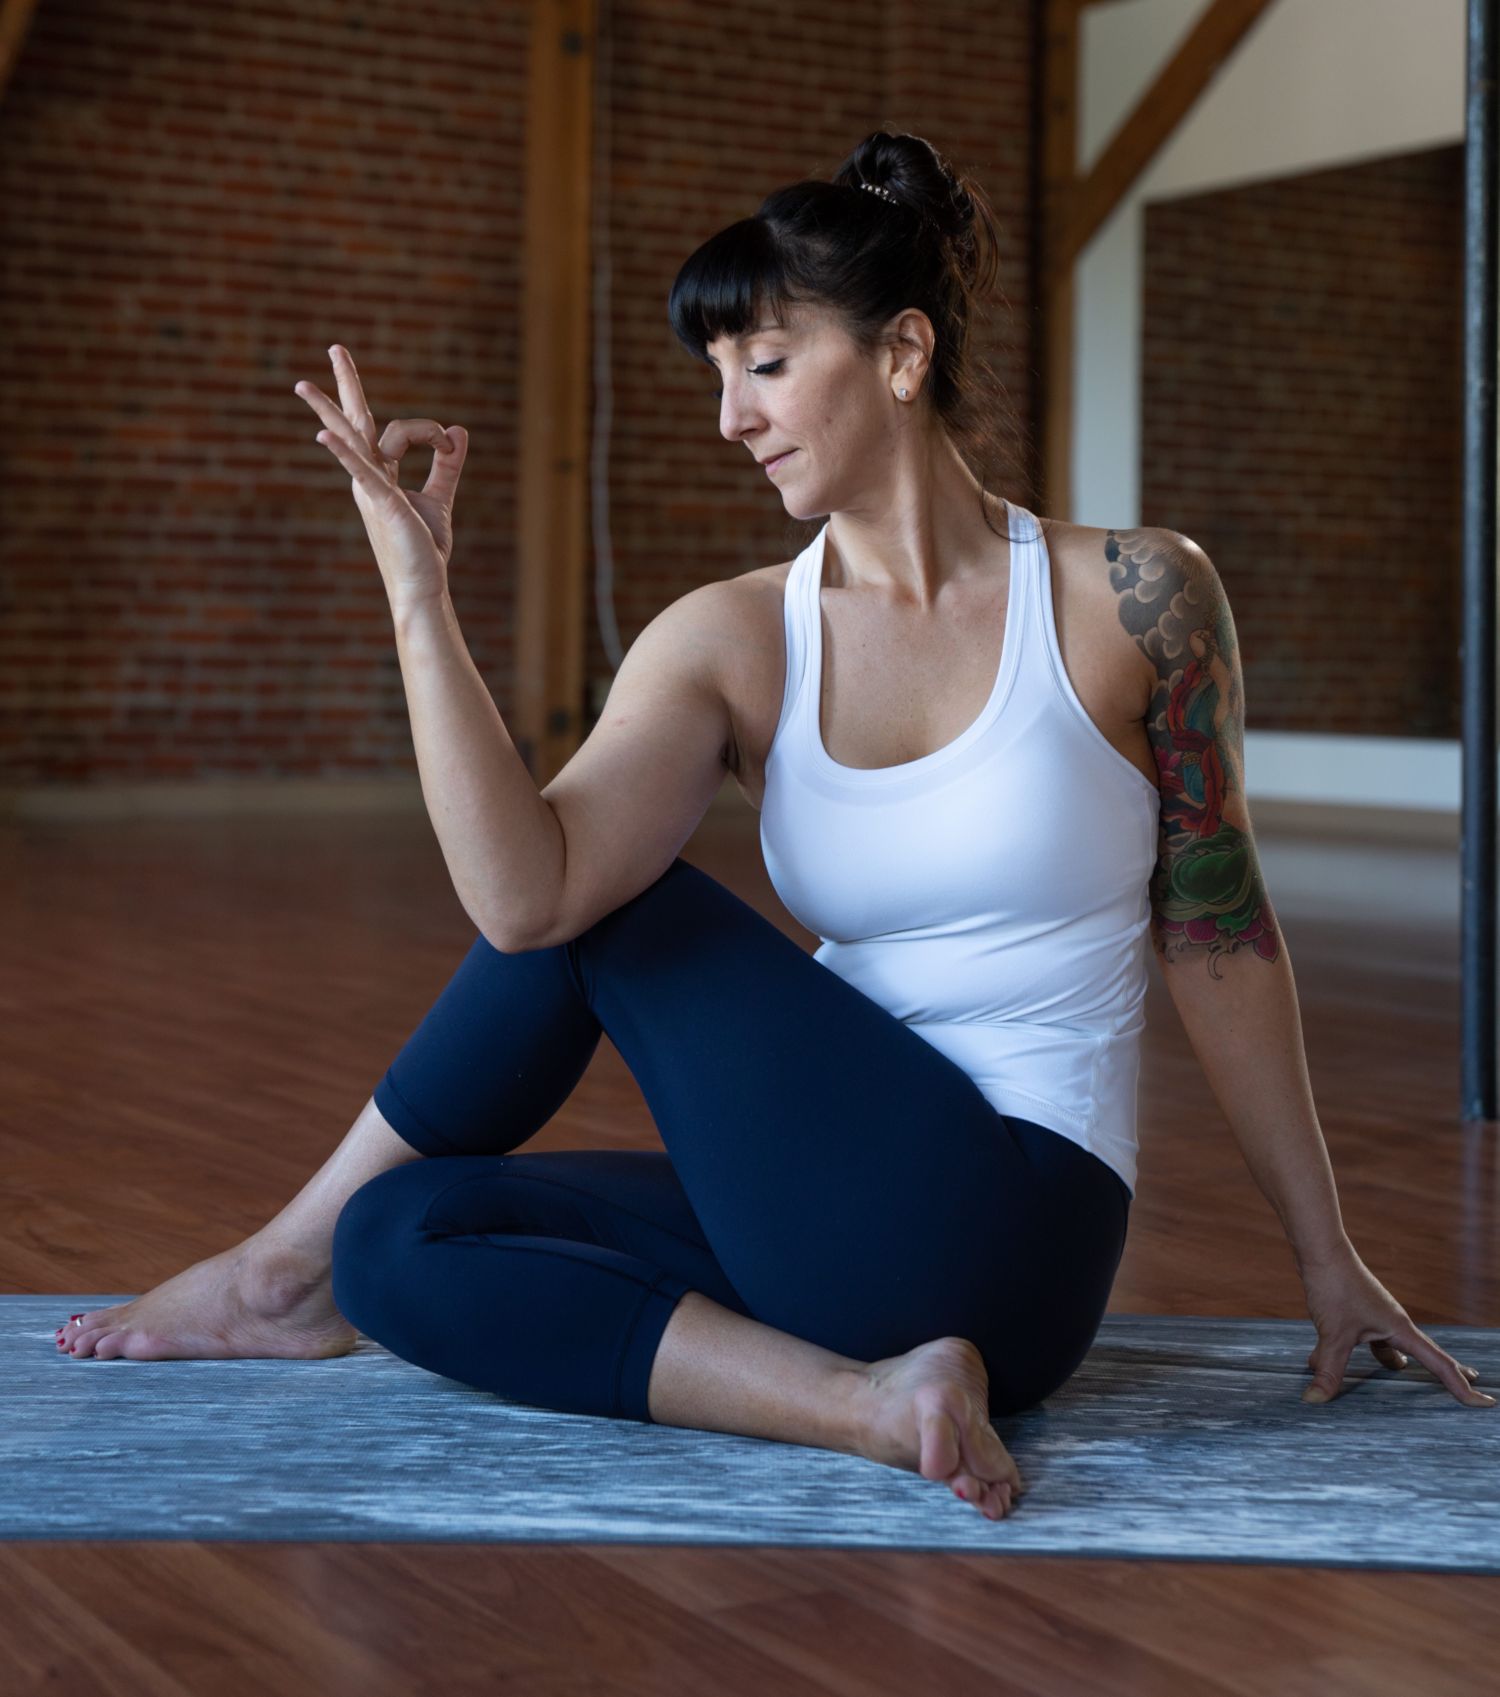 OM-azing: 5 best yoga poses for promoting healthy inflammation